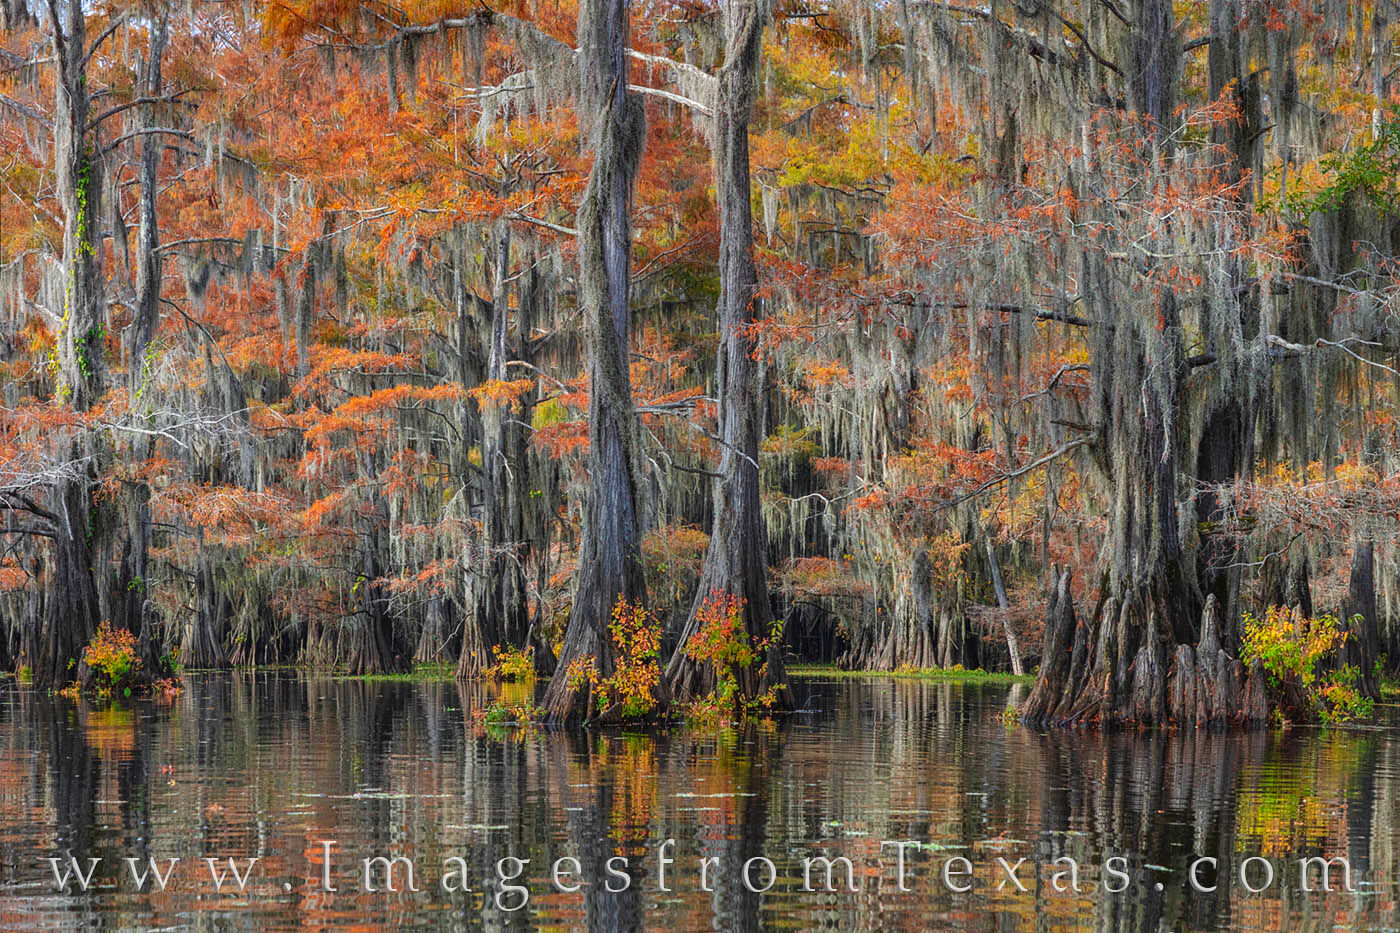 Orange leaves of cypress in the fall on Caddo Lake make for a beautiful scene on a cold November morning.